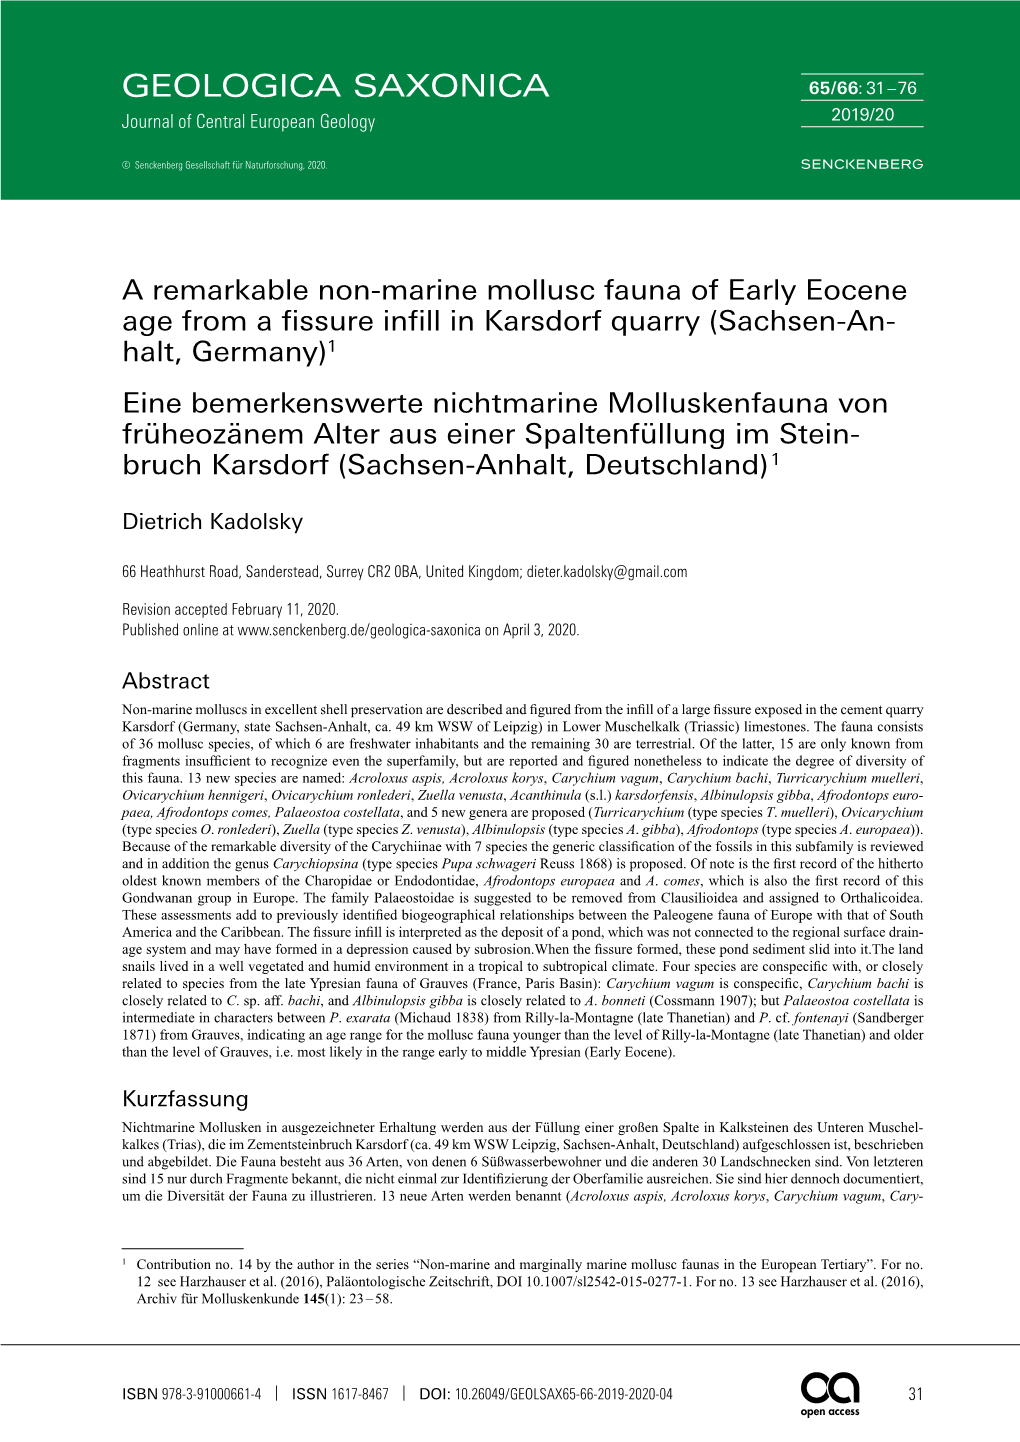 A Remarkable Non-Marine Mollusc Fauna of Early Eocene Age from A